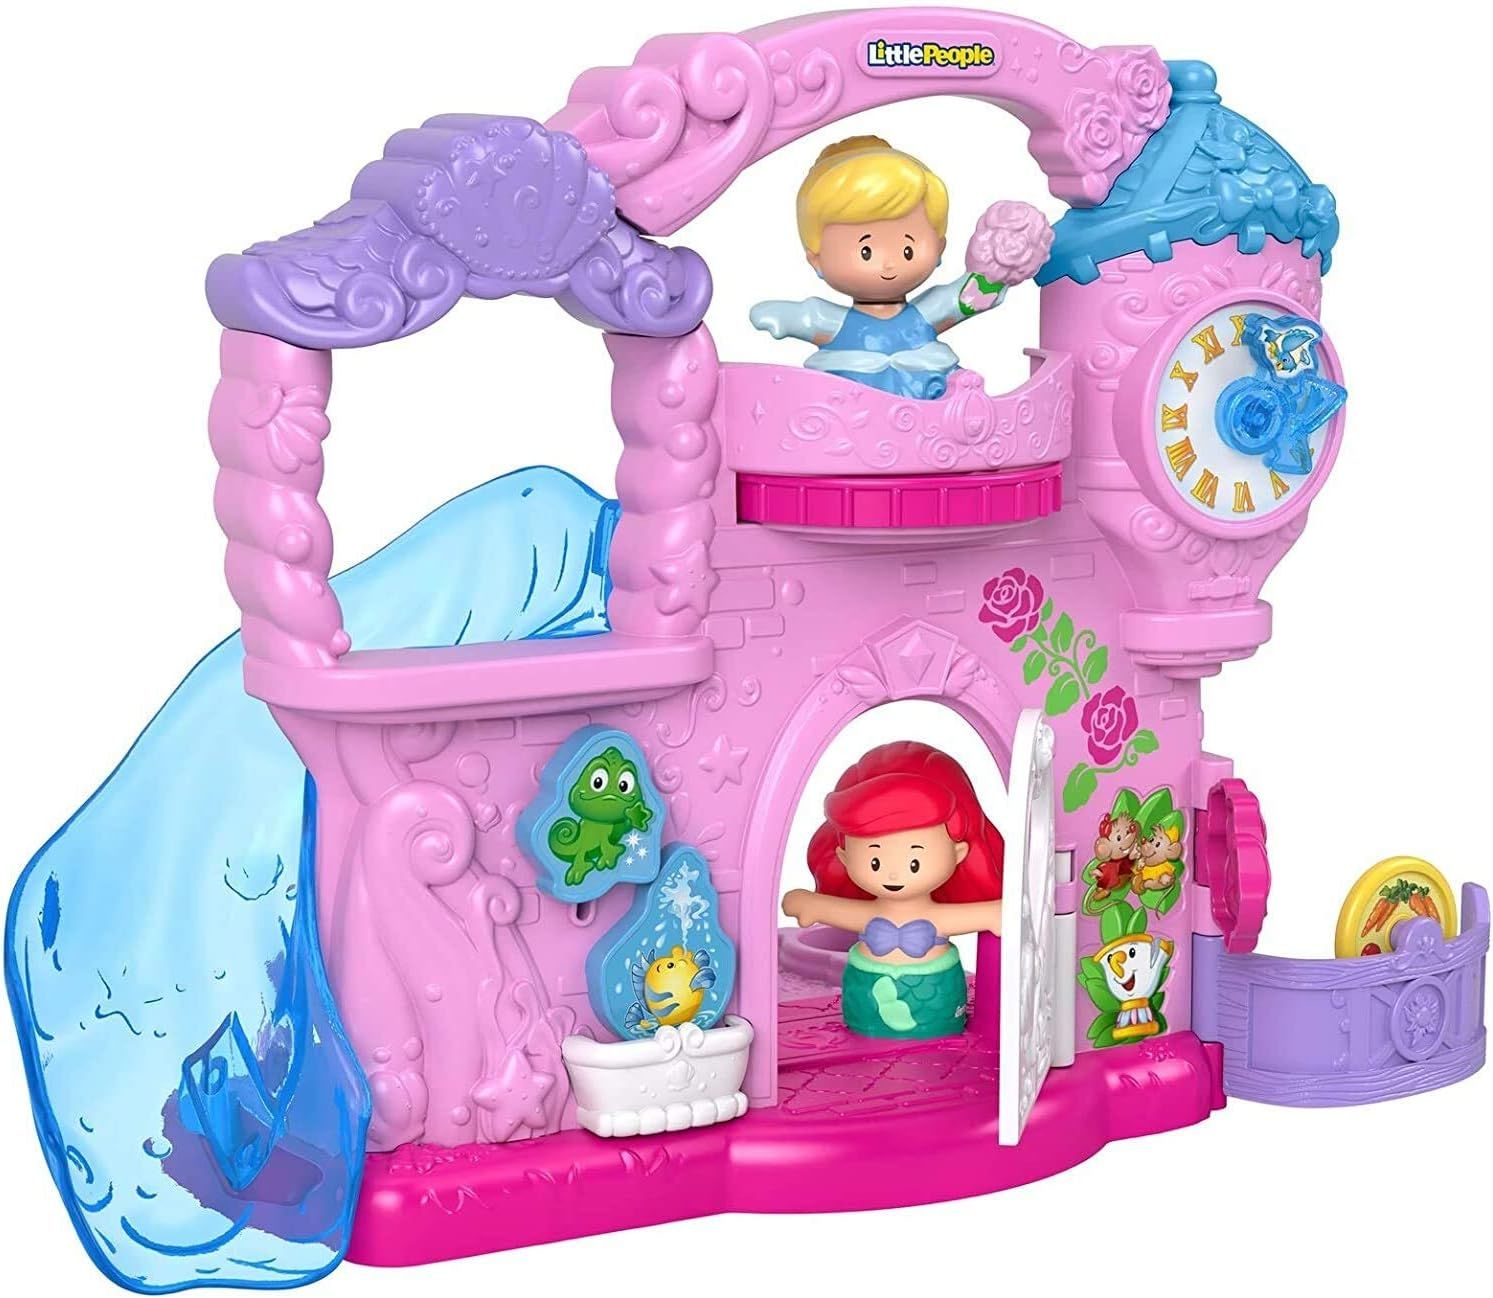 Fisher-Price Disney Princess Play & Go Castle by Little People | Amazon (US)